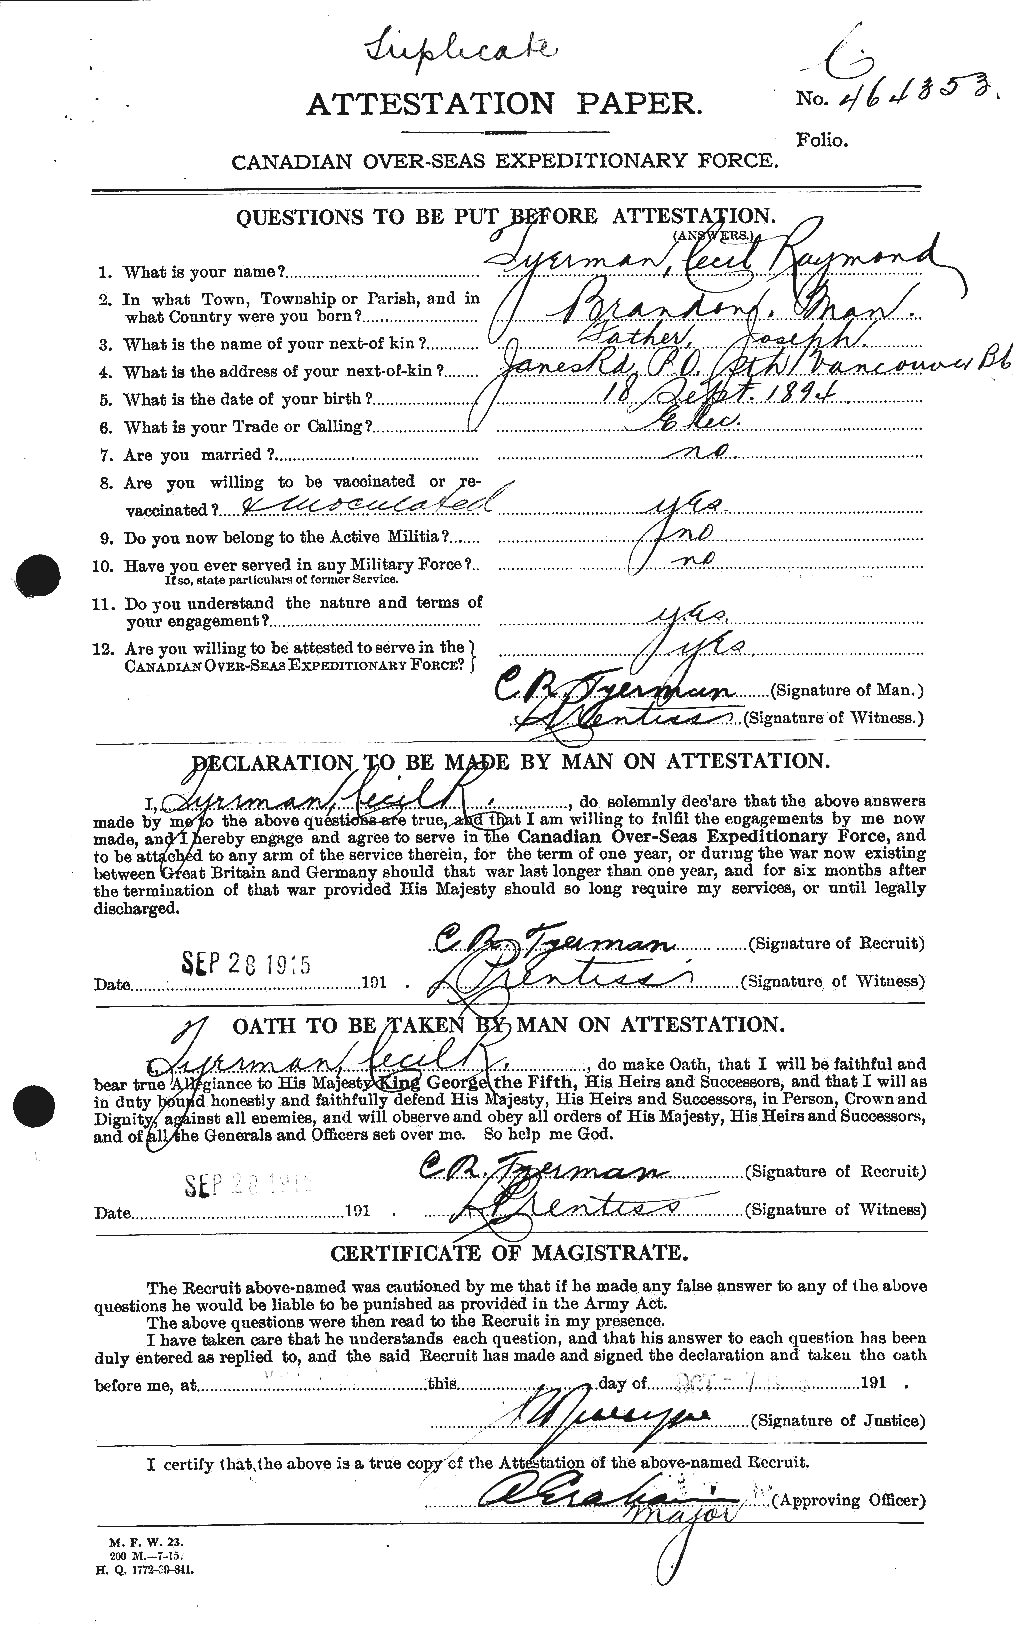 Personnel Records of the First World War - CEF 643646a